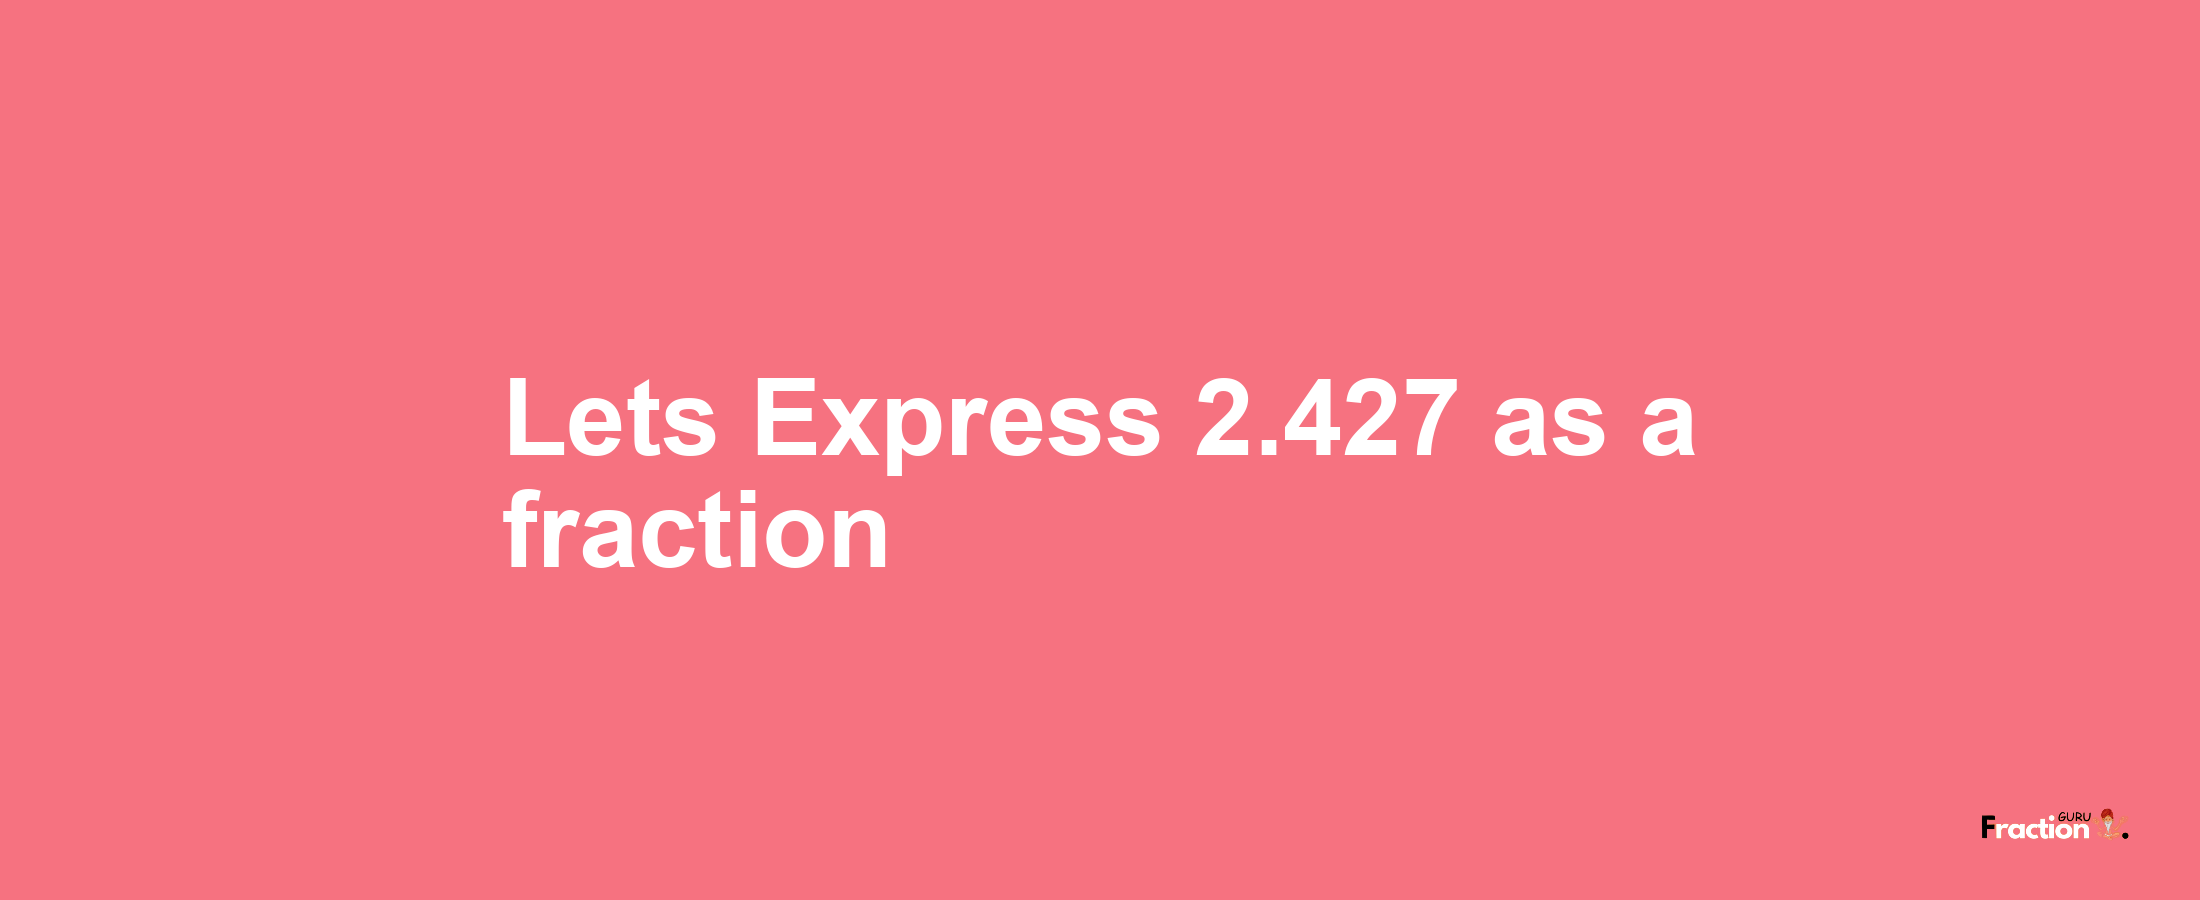 Lets Express 2.427 as afraction